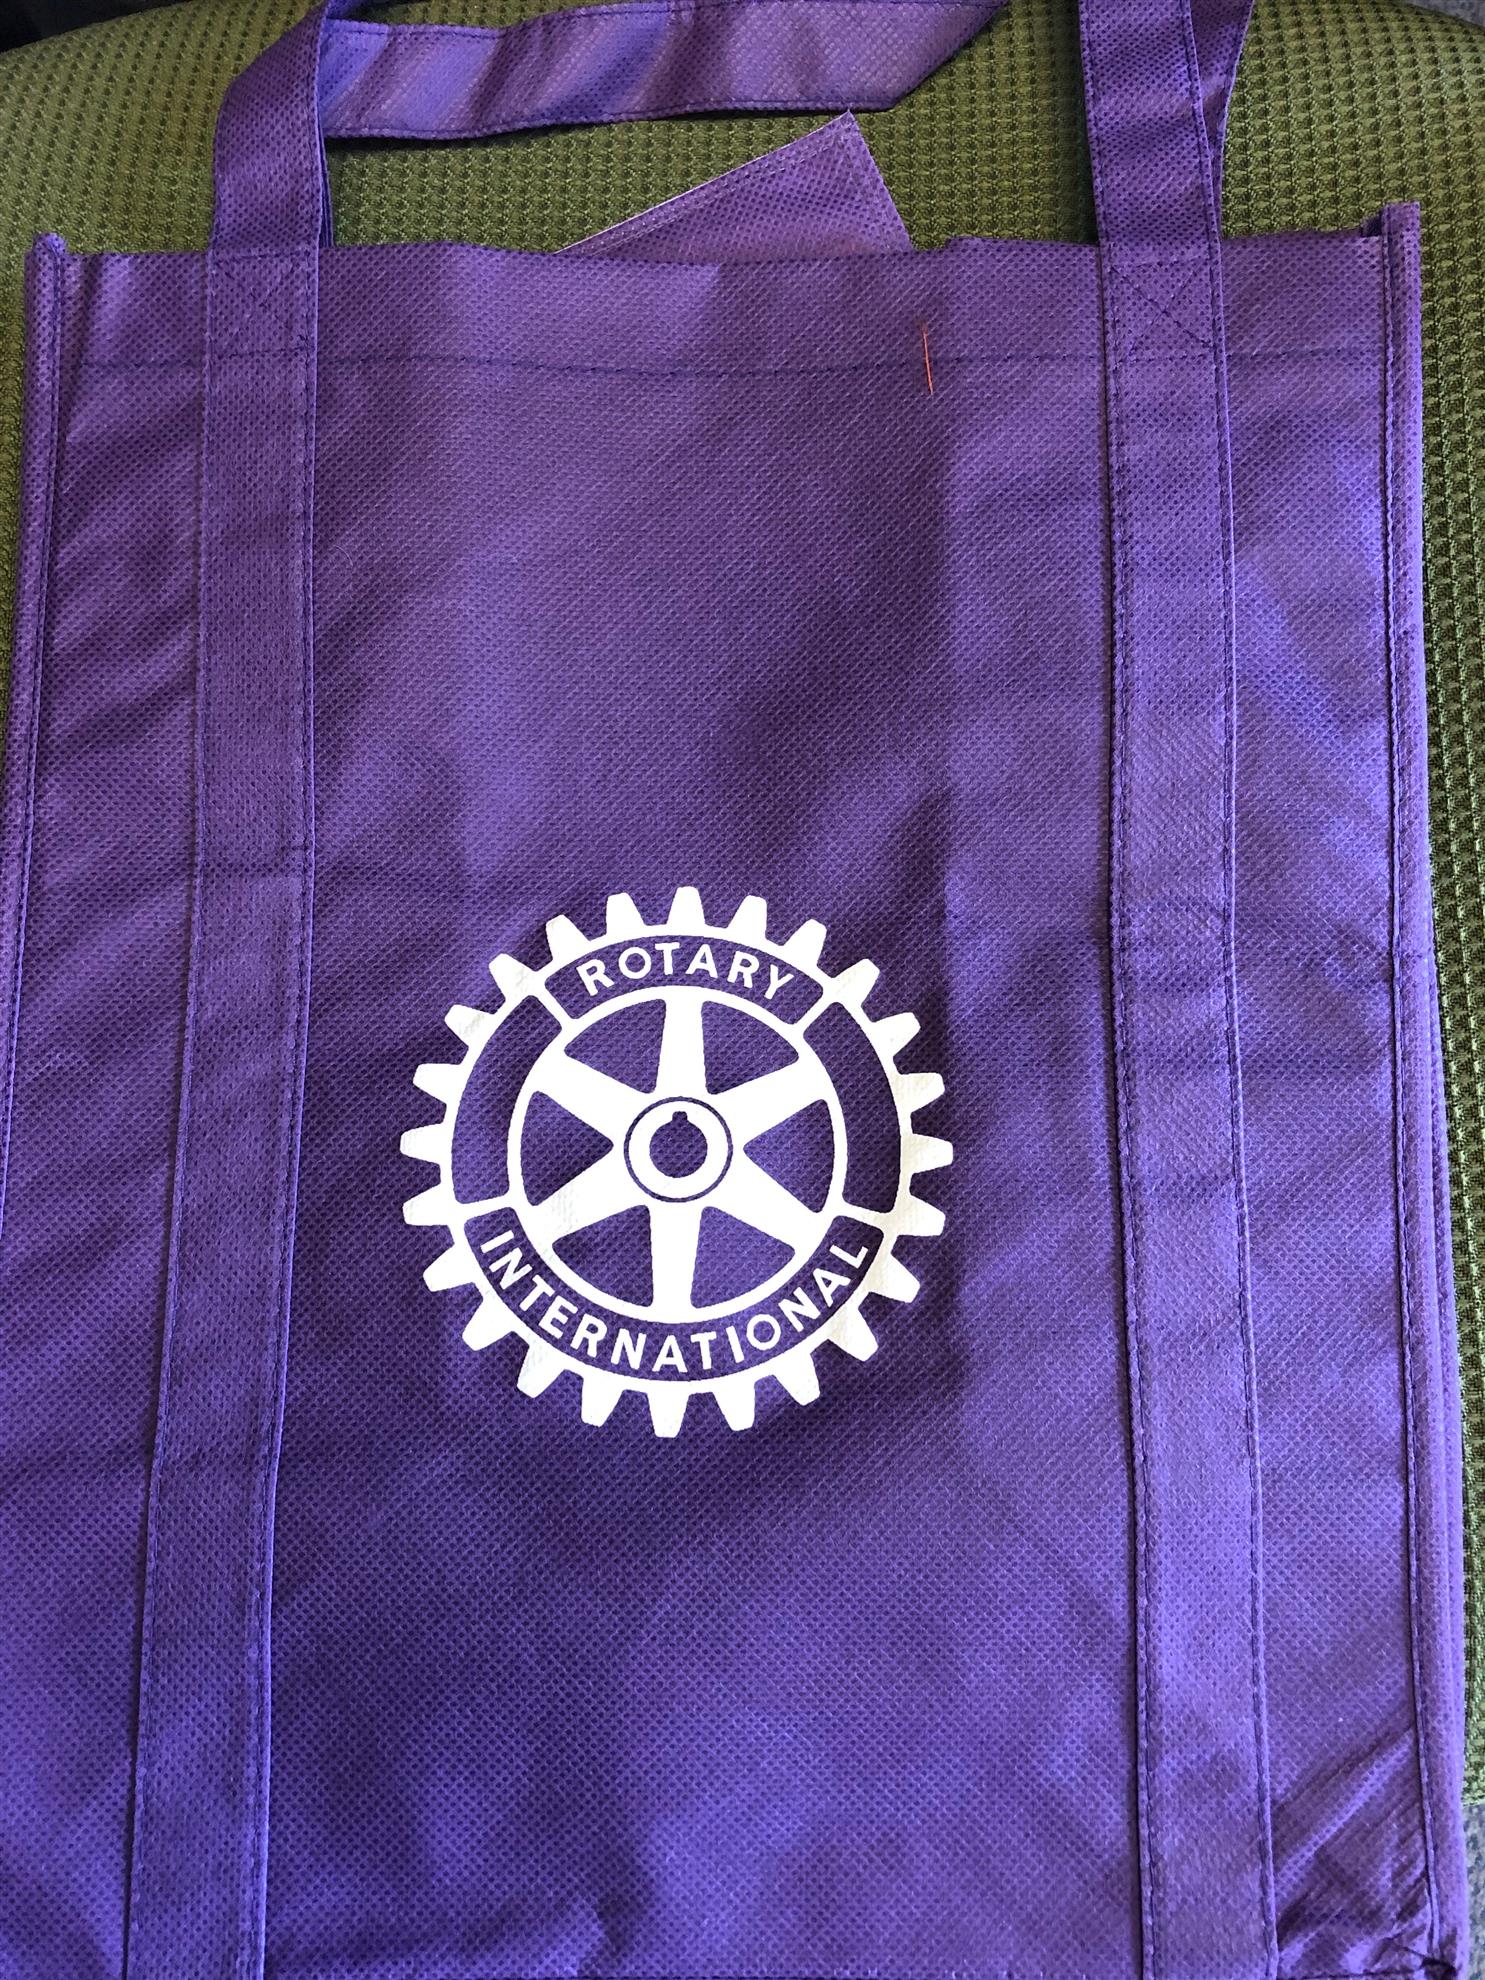 PURPLE BAG PROJECT Rotary Club of Canton